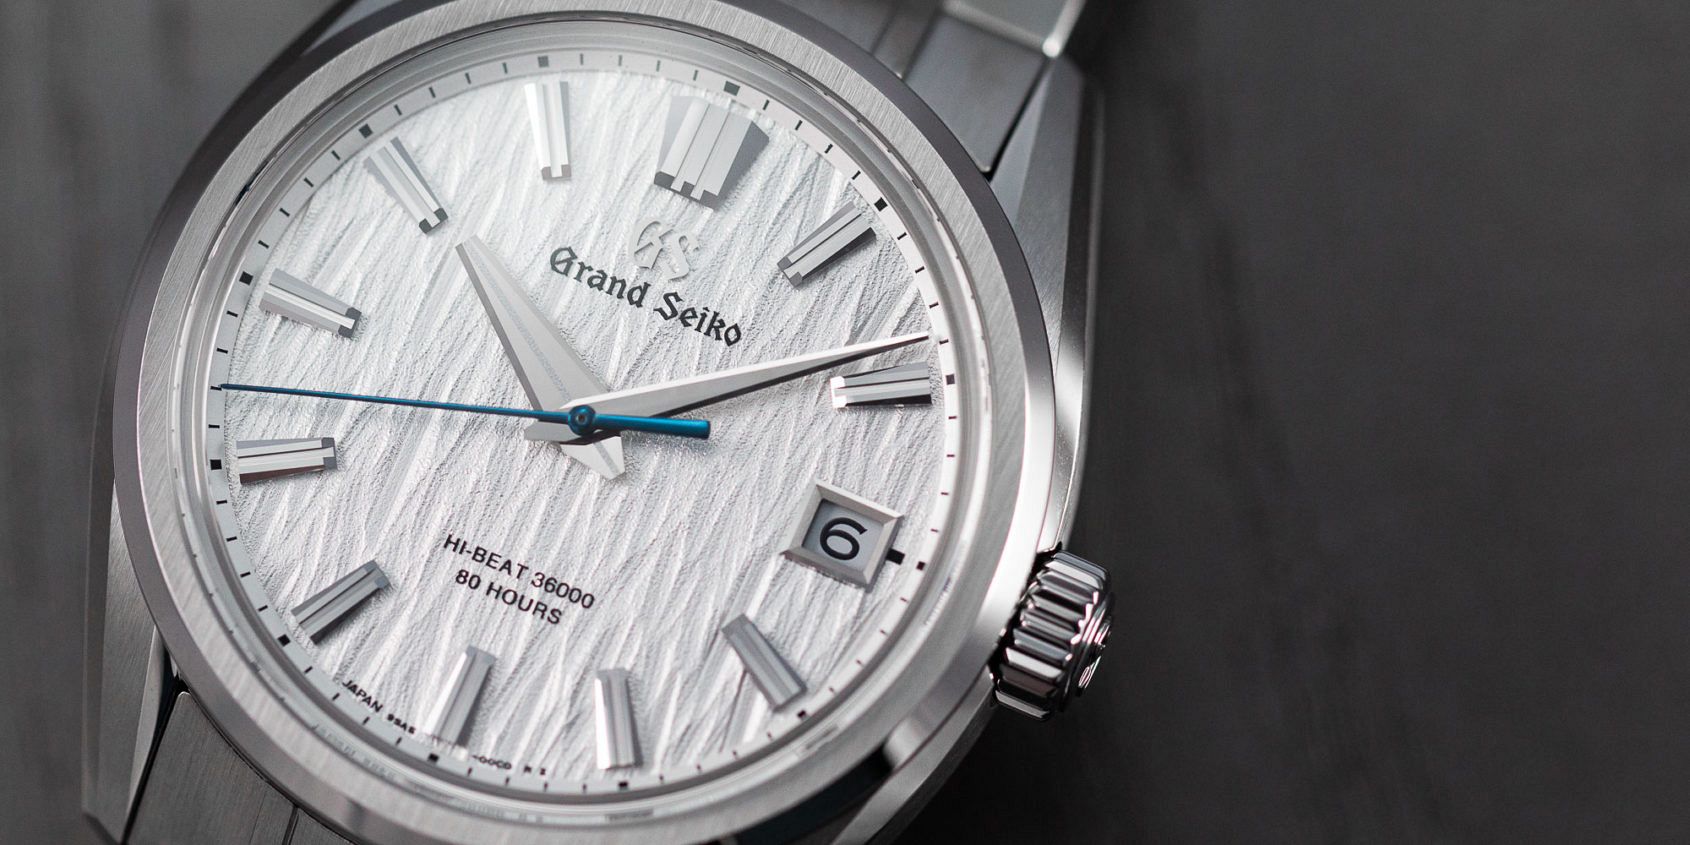 INTRODUCING: The Grand Seiko SLGH005 brings the 9SA5 to standard production in steel